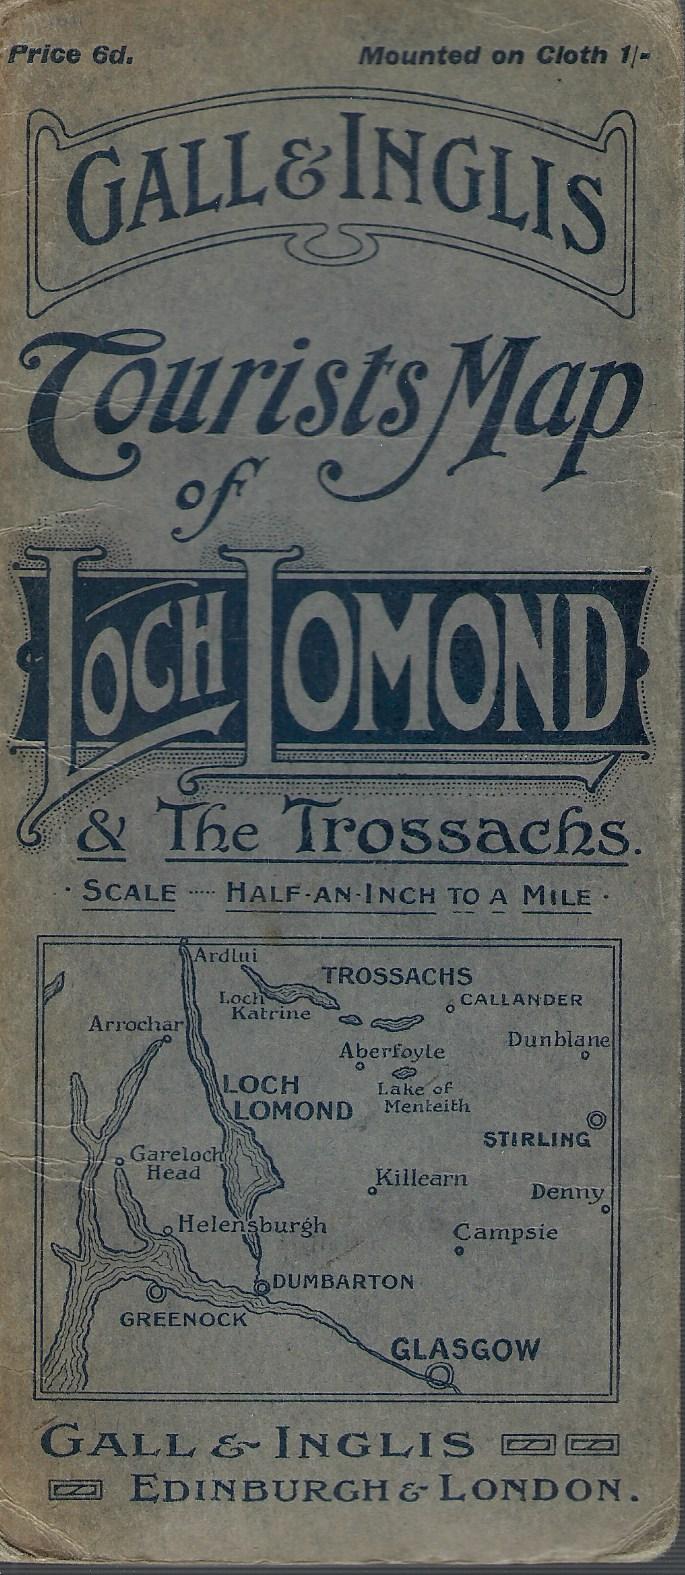 Image for Gall & Inglis Tourist Map of Loch Lomond & the Trossachs